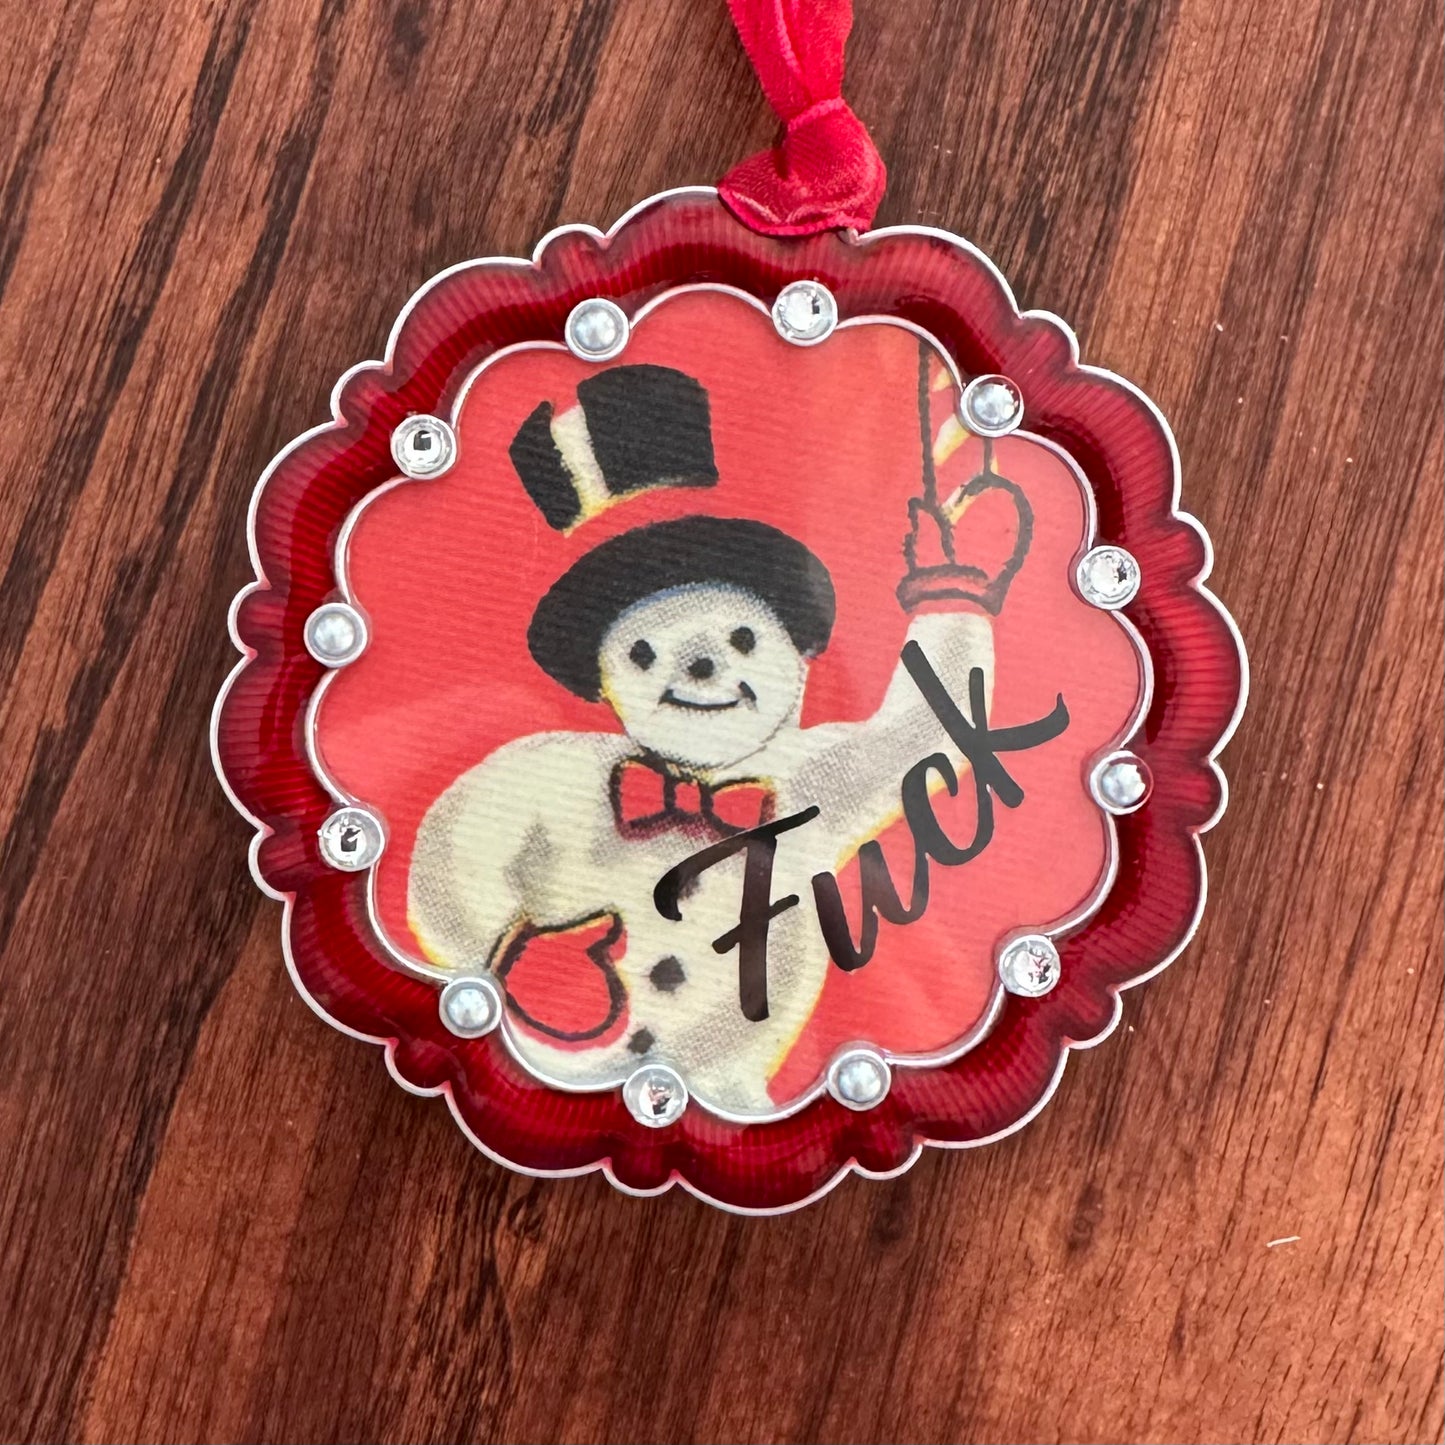 Vintage Snowman Fuck Metal and Jewel Holiday Ornament